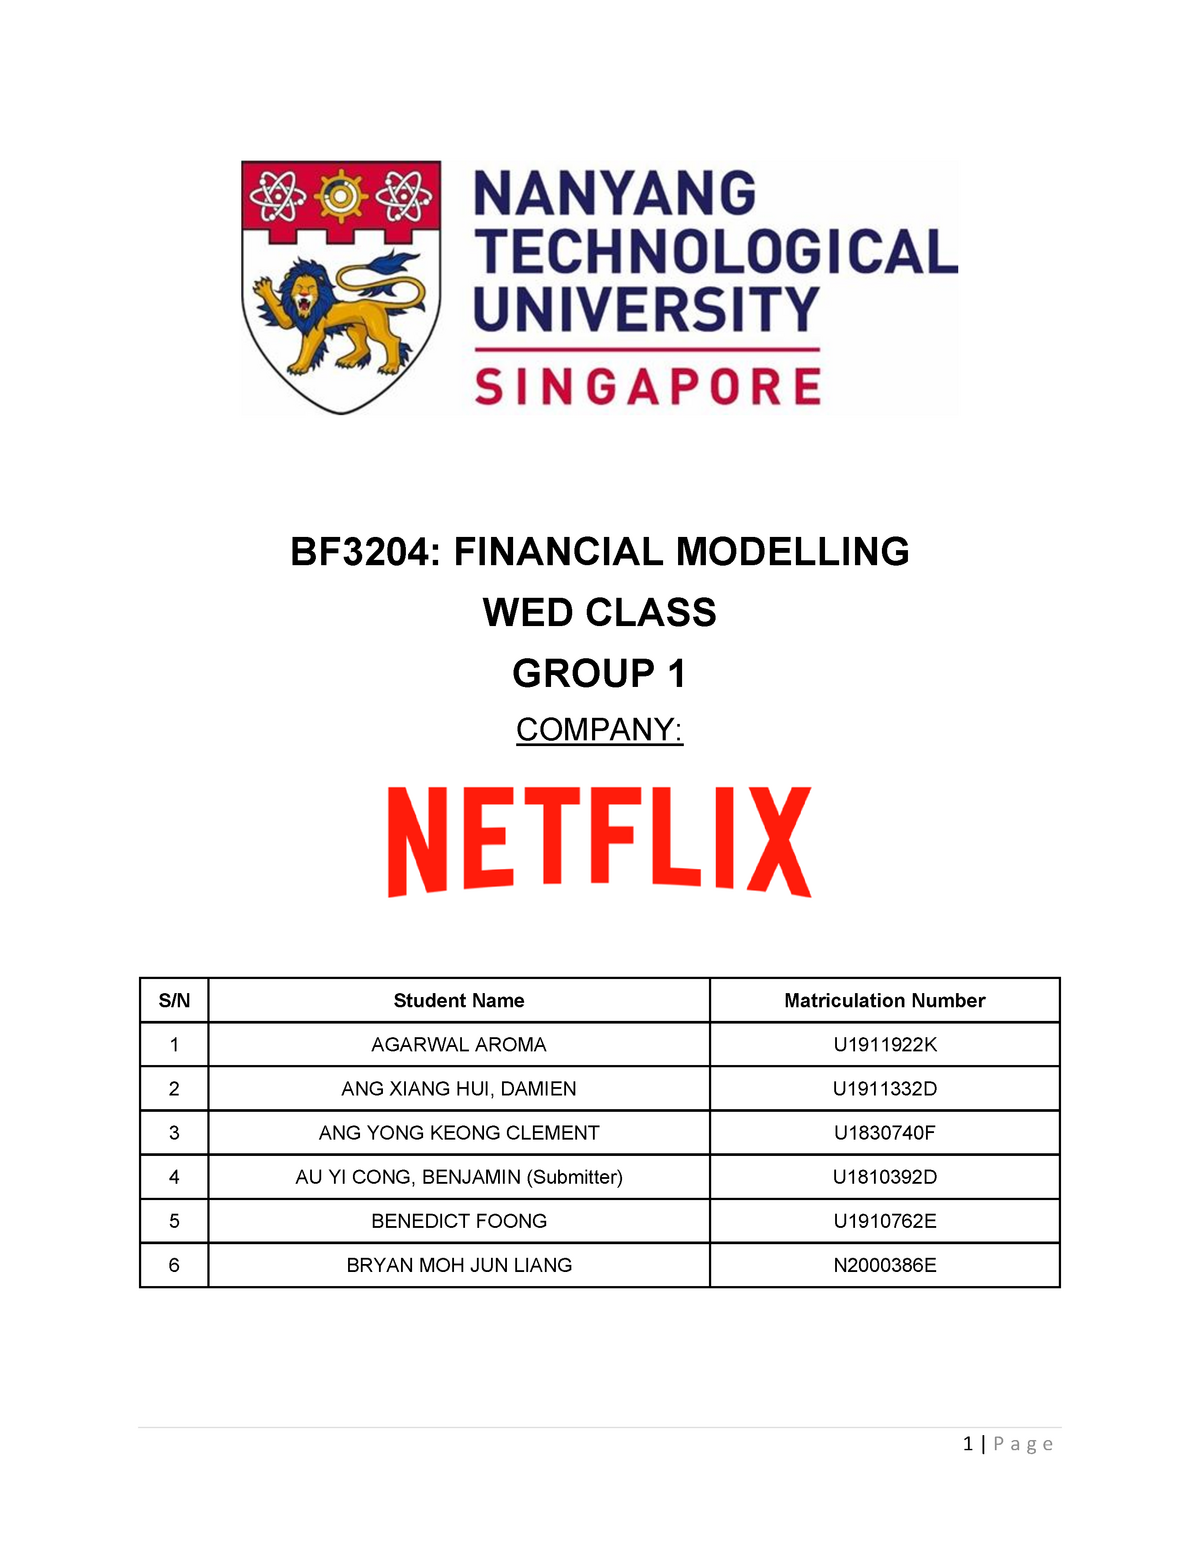 netflix equity research report pdf